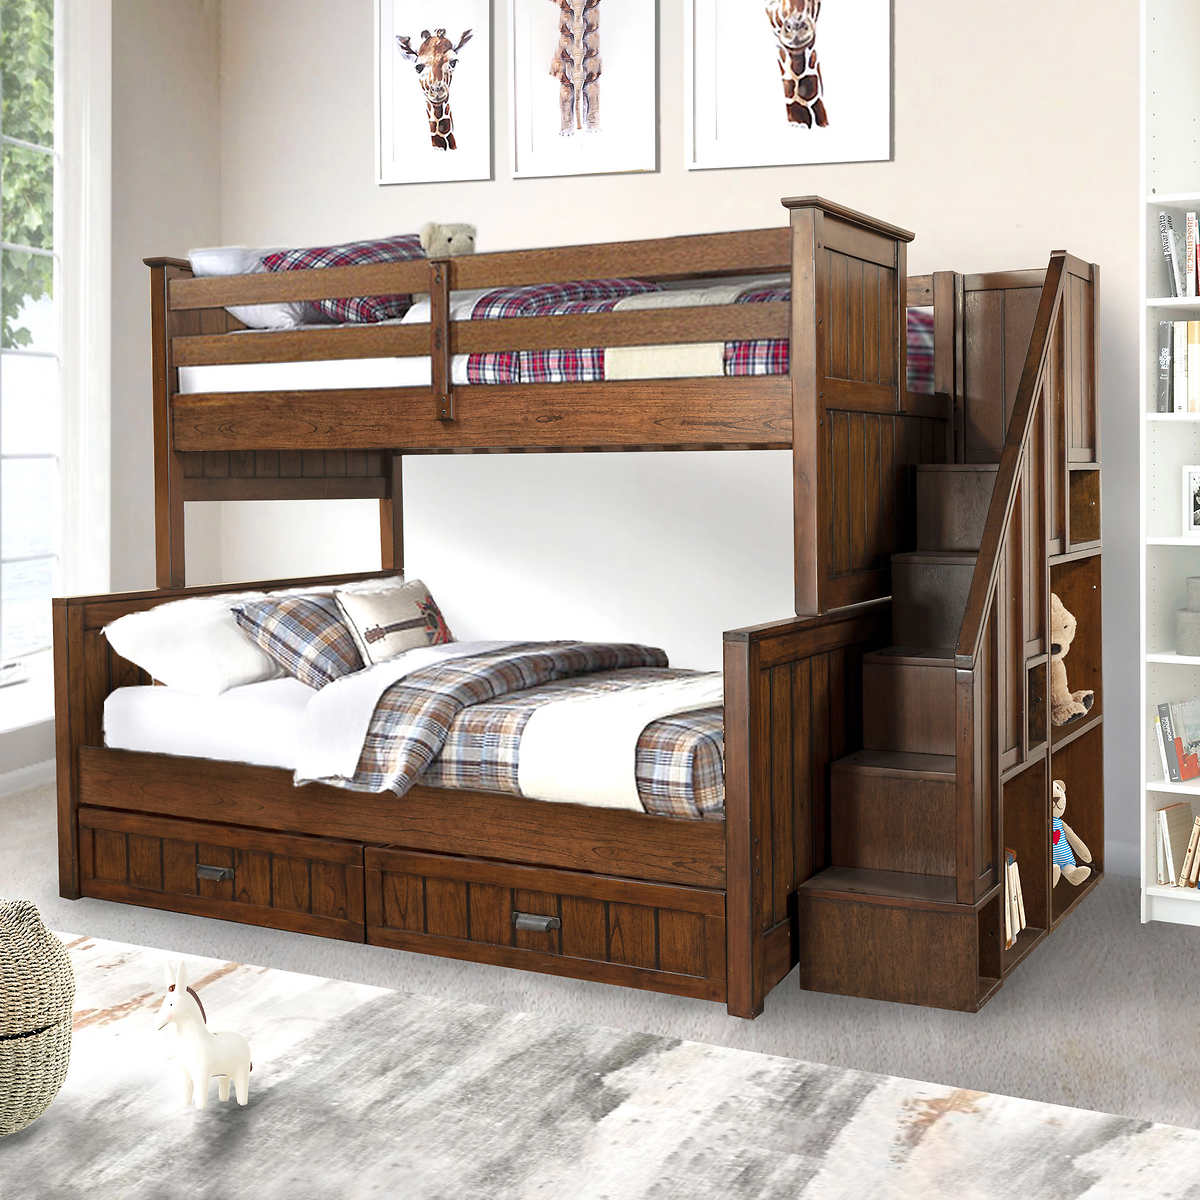 Maddox Twin Over Double Bunk Bed Costco, Bunk Bunk Beds